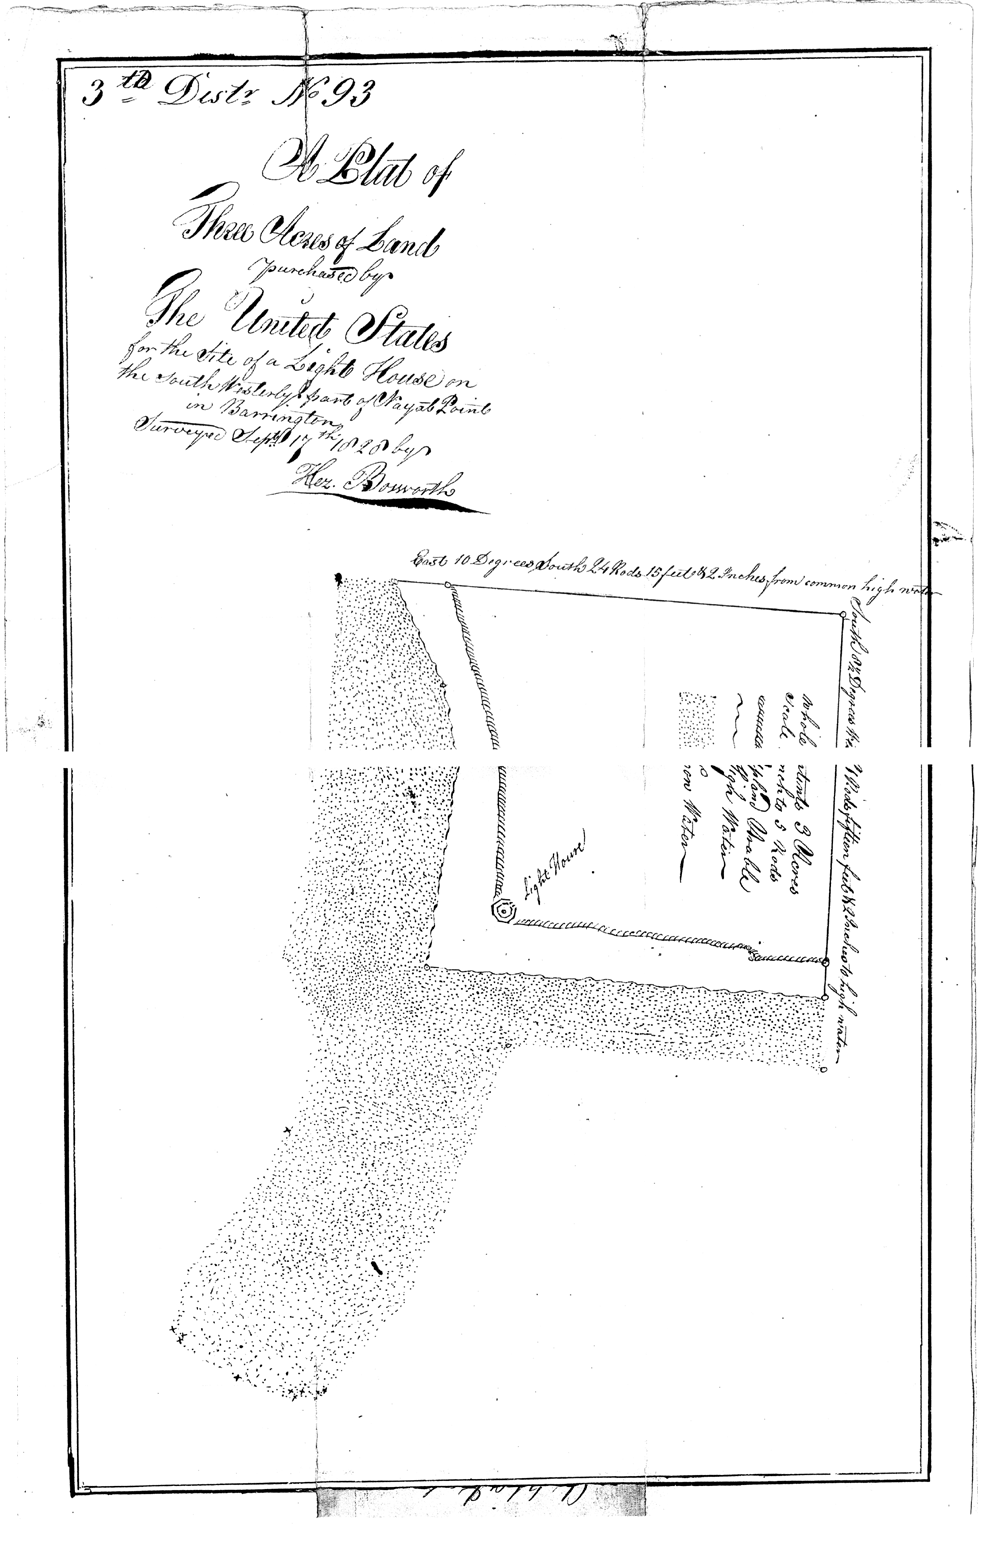 Plat of Three Acres of Land for site of Nayatt Point Lighthouse